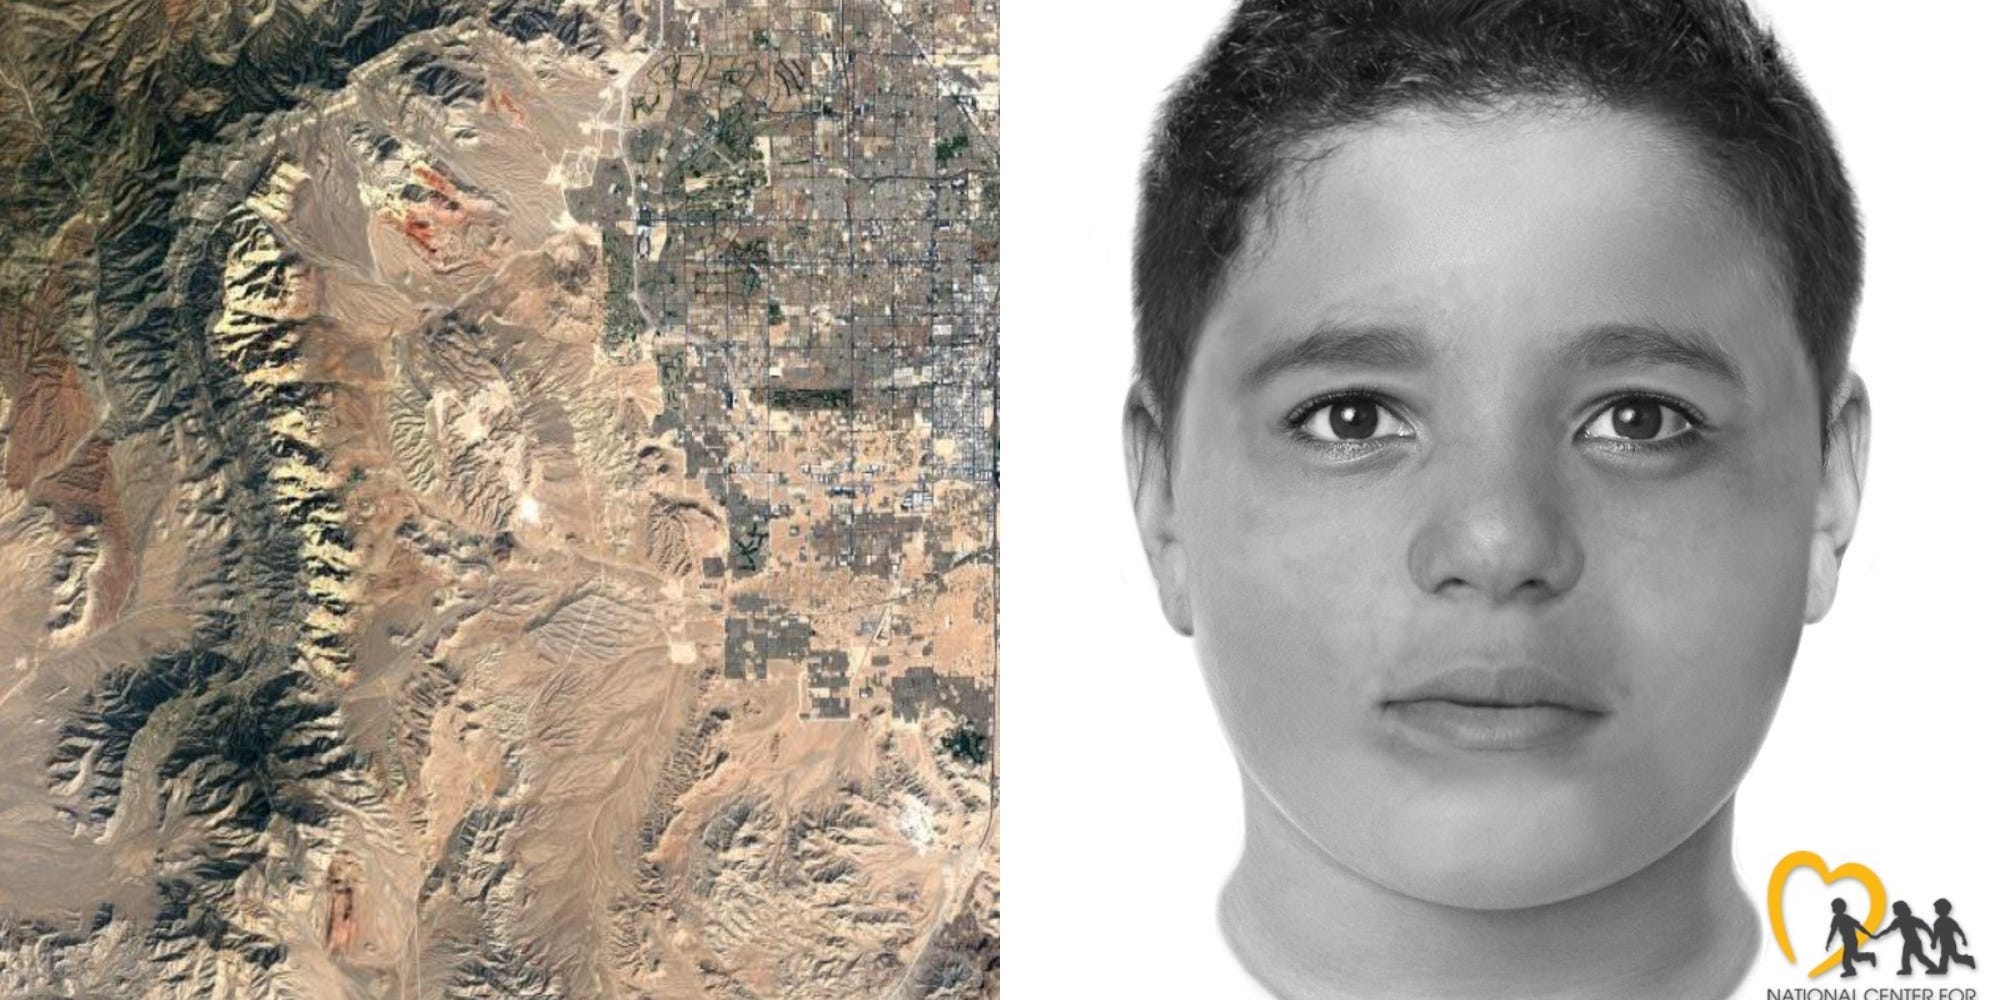 A composite image showing a Google Map of the area outside Las Vegas where the body was found, and the police's image of the boy.